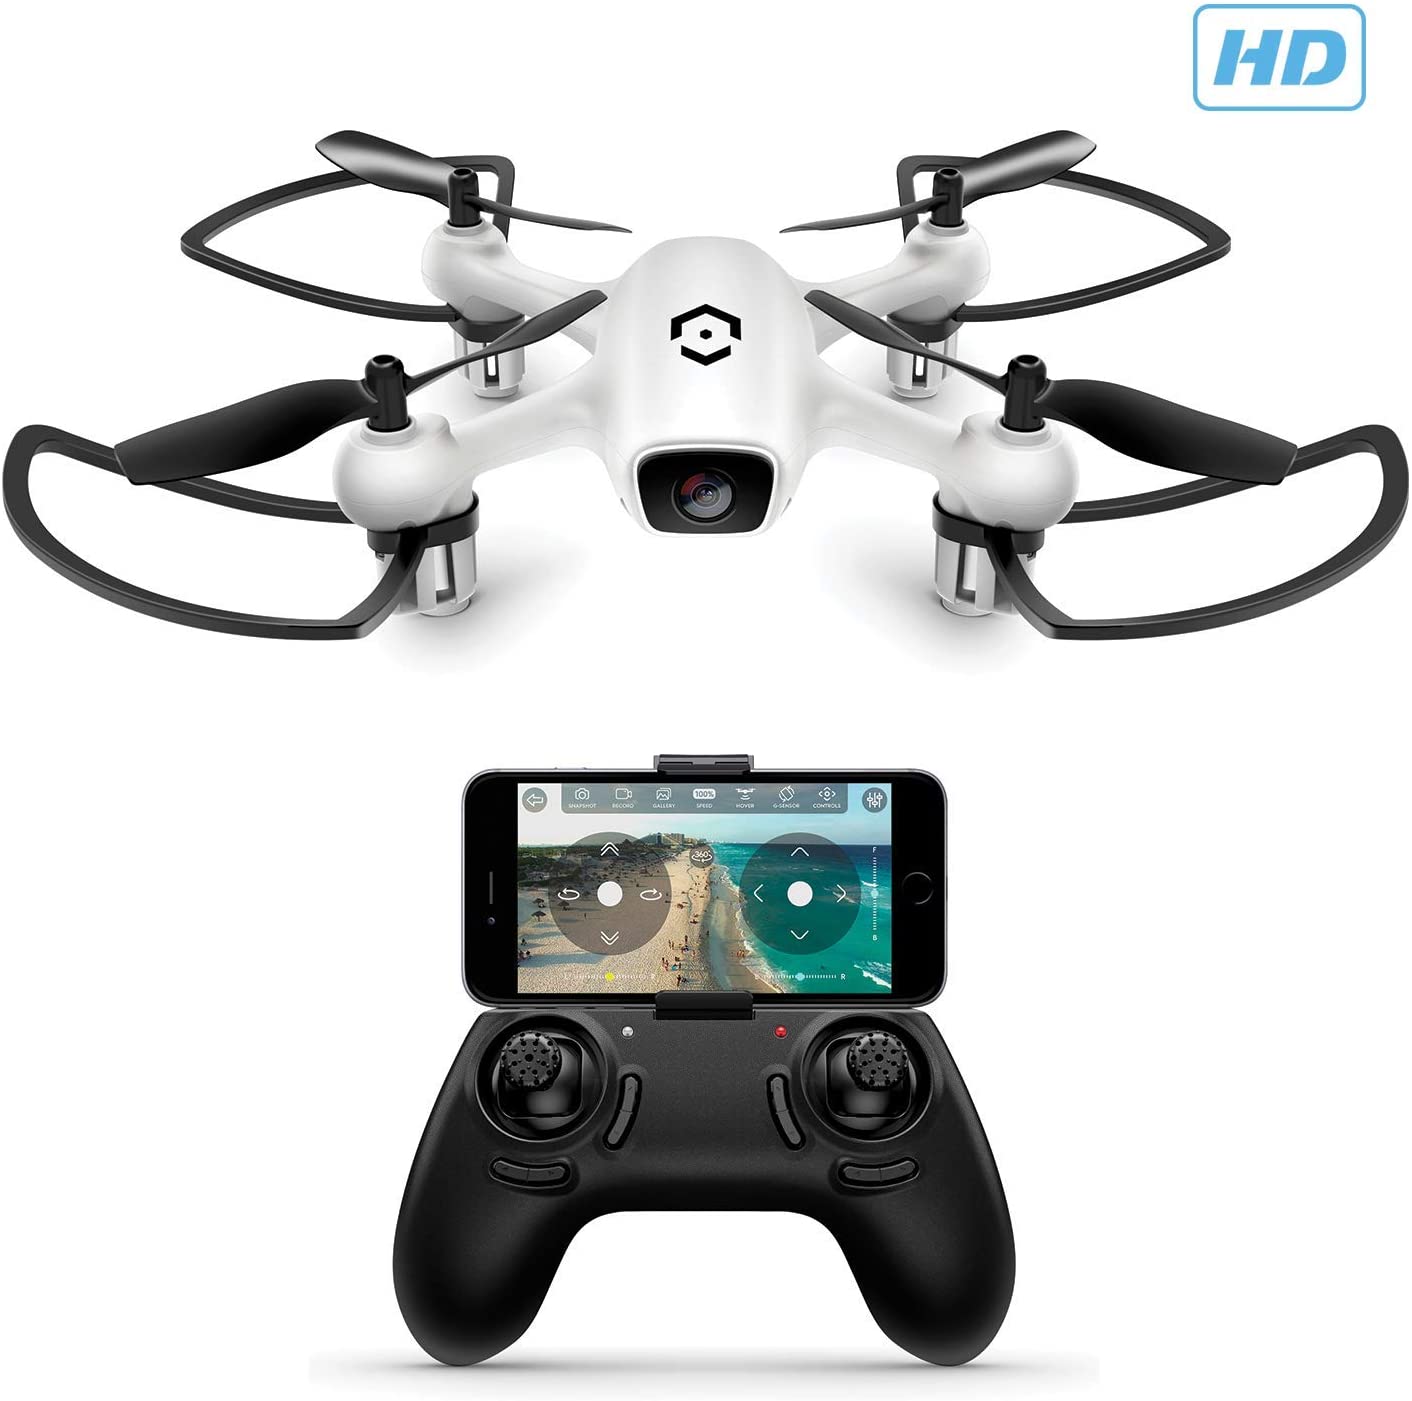 Skyview WiFi Drone with Camera HD 720P FPV Quadcopter, Training Drone for Beginner &amp; Kids, RC + 2.4ghz WiFi Helicopter w/Remote Control, Headless Mode | Decor Gifts and More